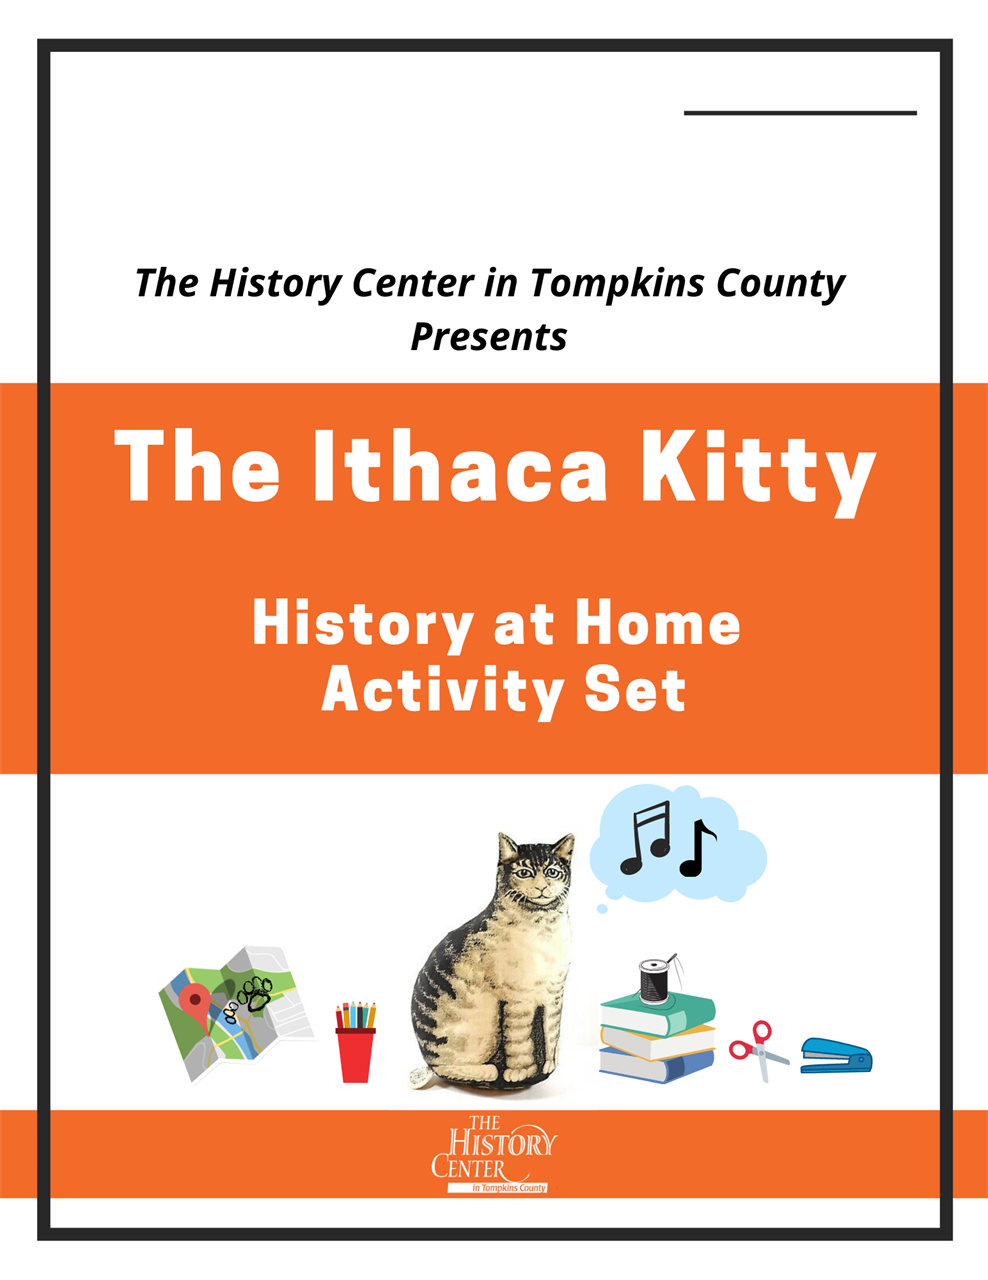 A small image of the "The Ithaca Kitty" History at Home Activity Set